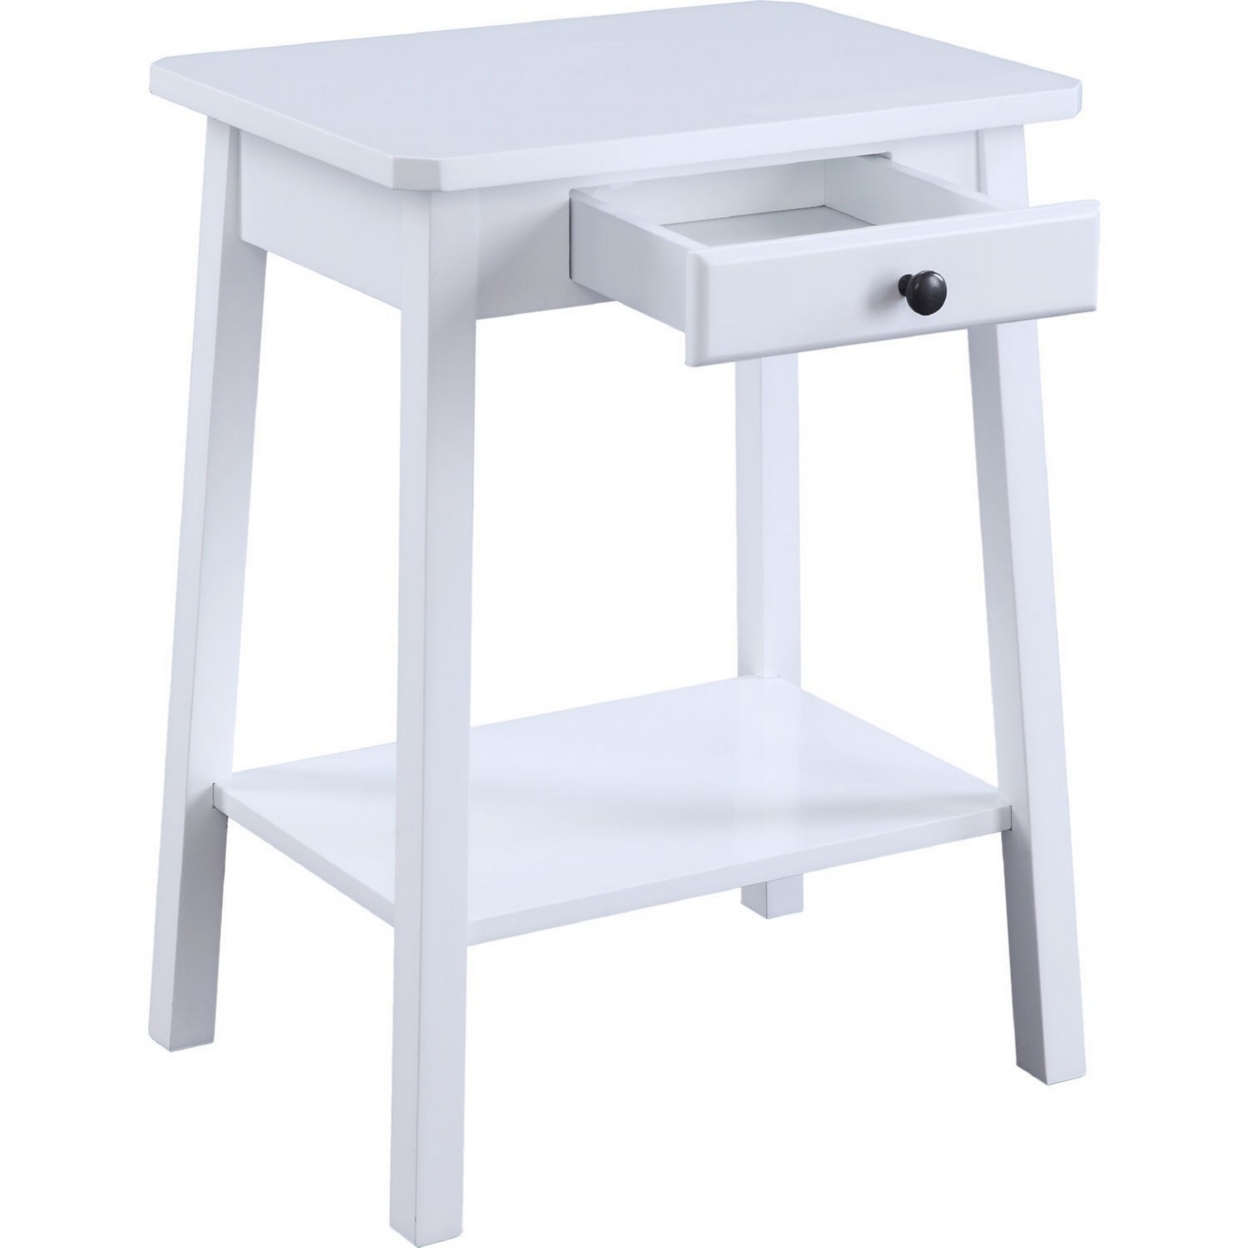 MDF Accent Table With 1 Drawer And Open Shelf, White- Saltoro Sherpi